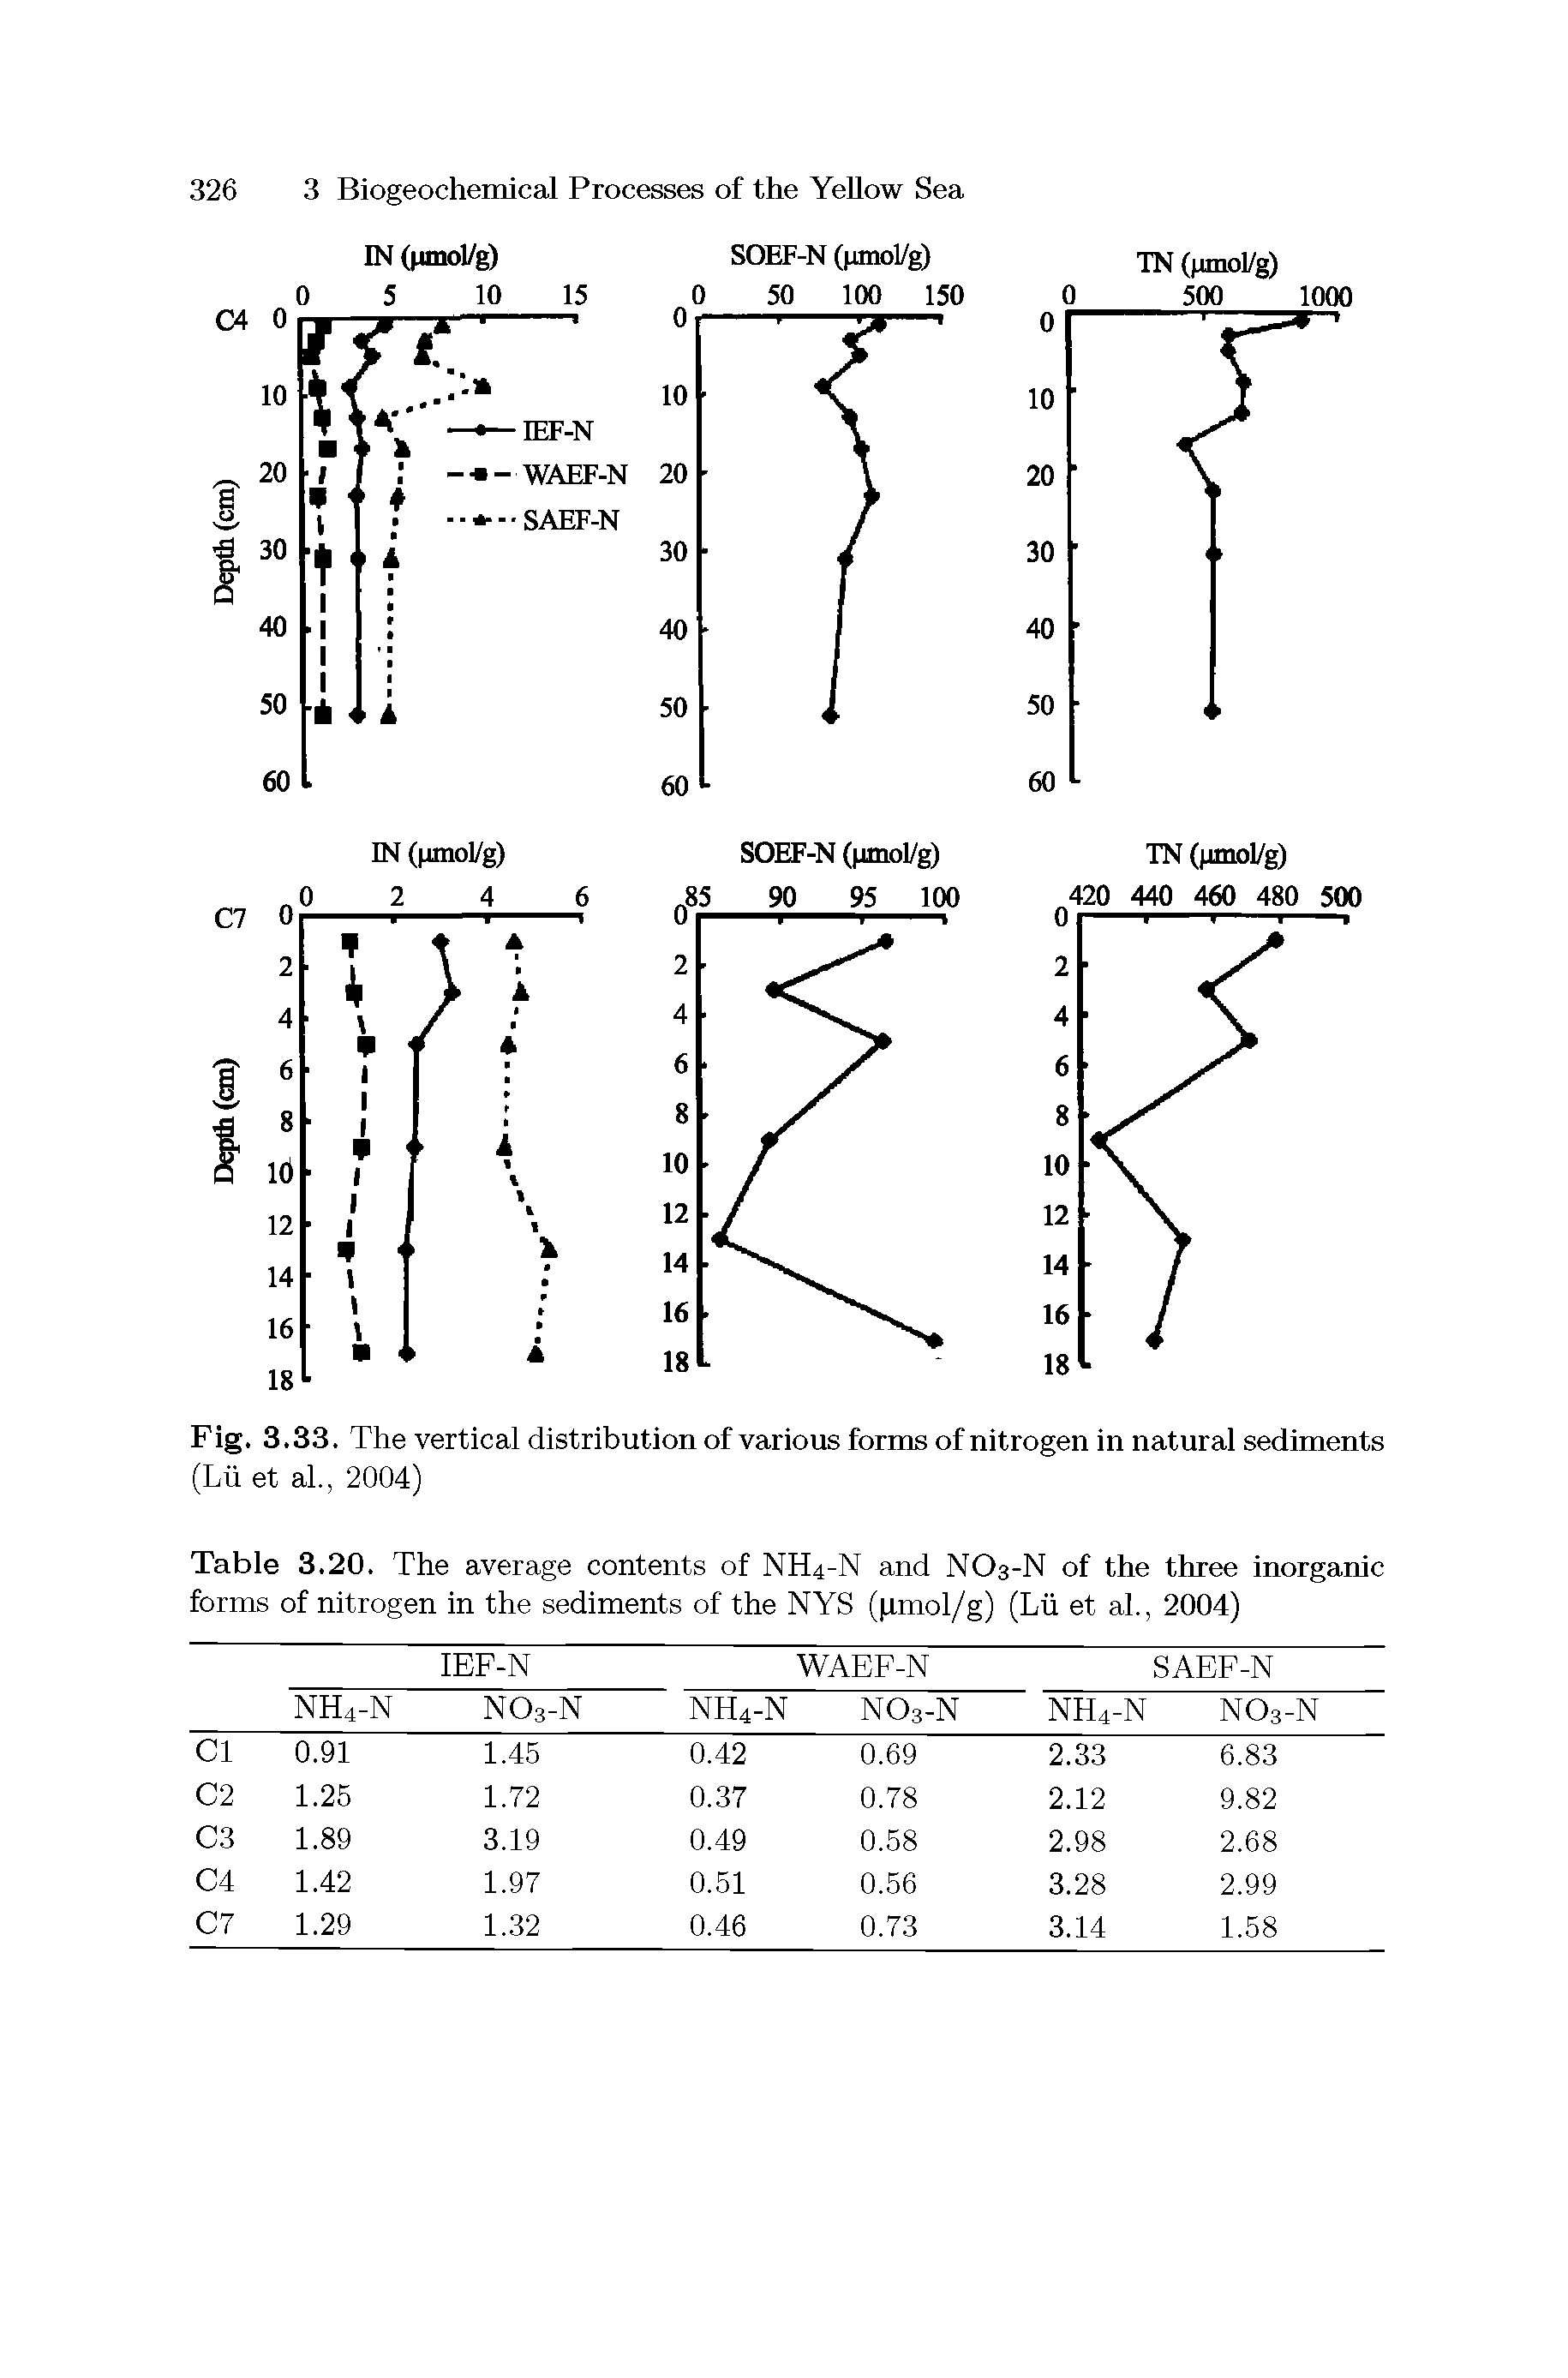 Table 3.20. The average contents of NH4-N and NO3-N of the three inorganic forms of nitrogen in the sediments of the NYS (jrmol/g) (Lii et al., 2004)...